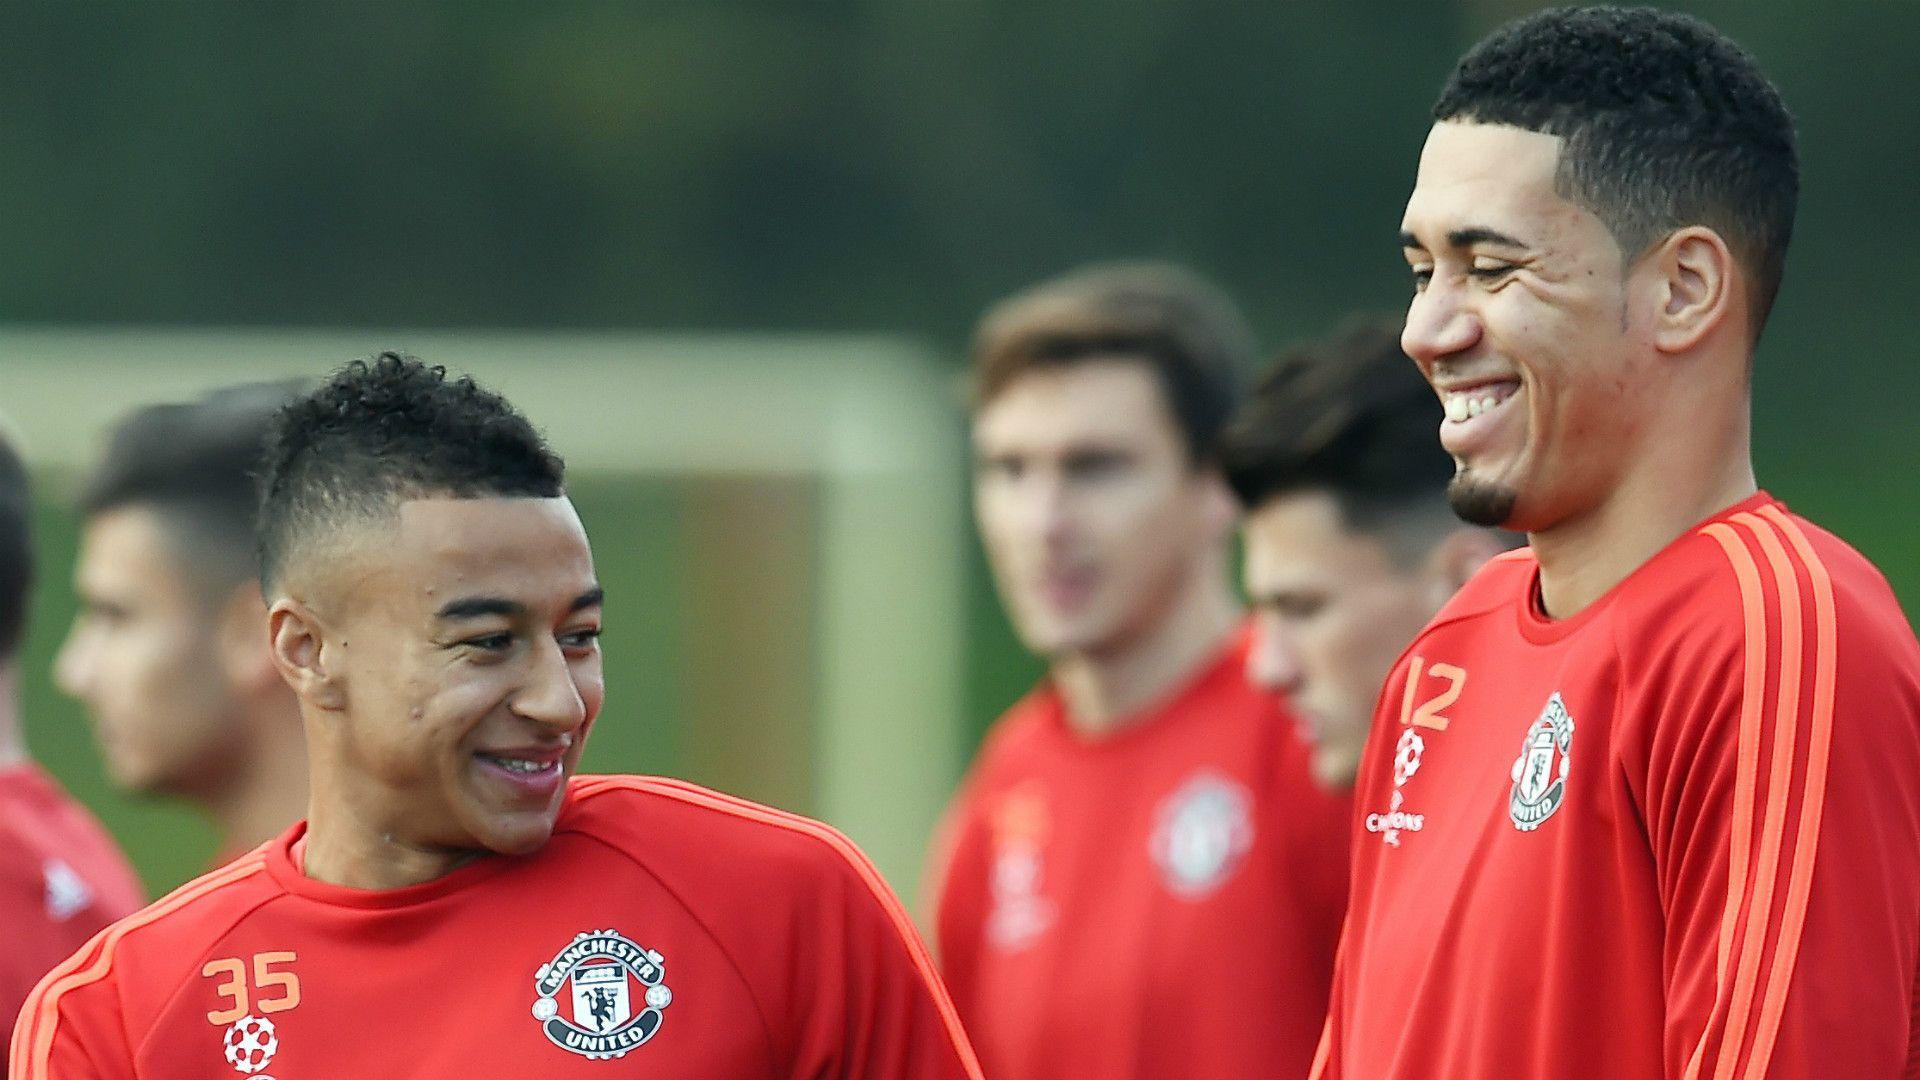 Man Utd Comment: Could Jesse Lingard be Man Utd's attacking savior